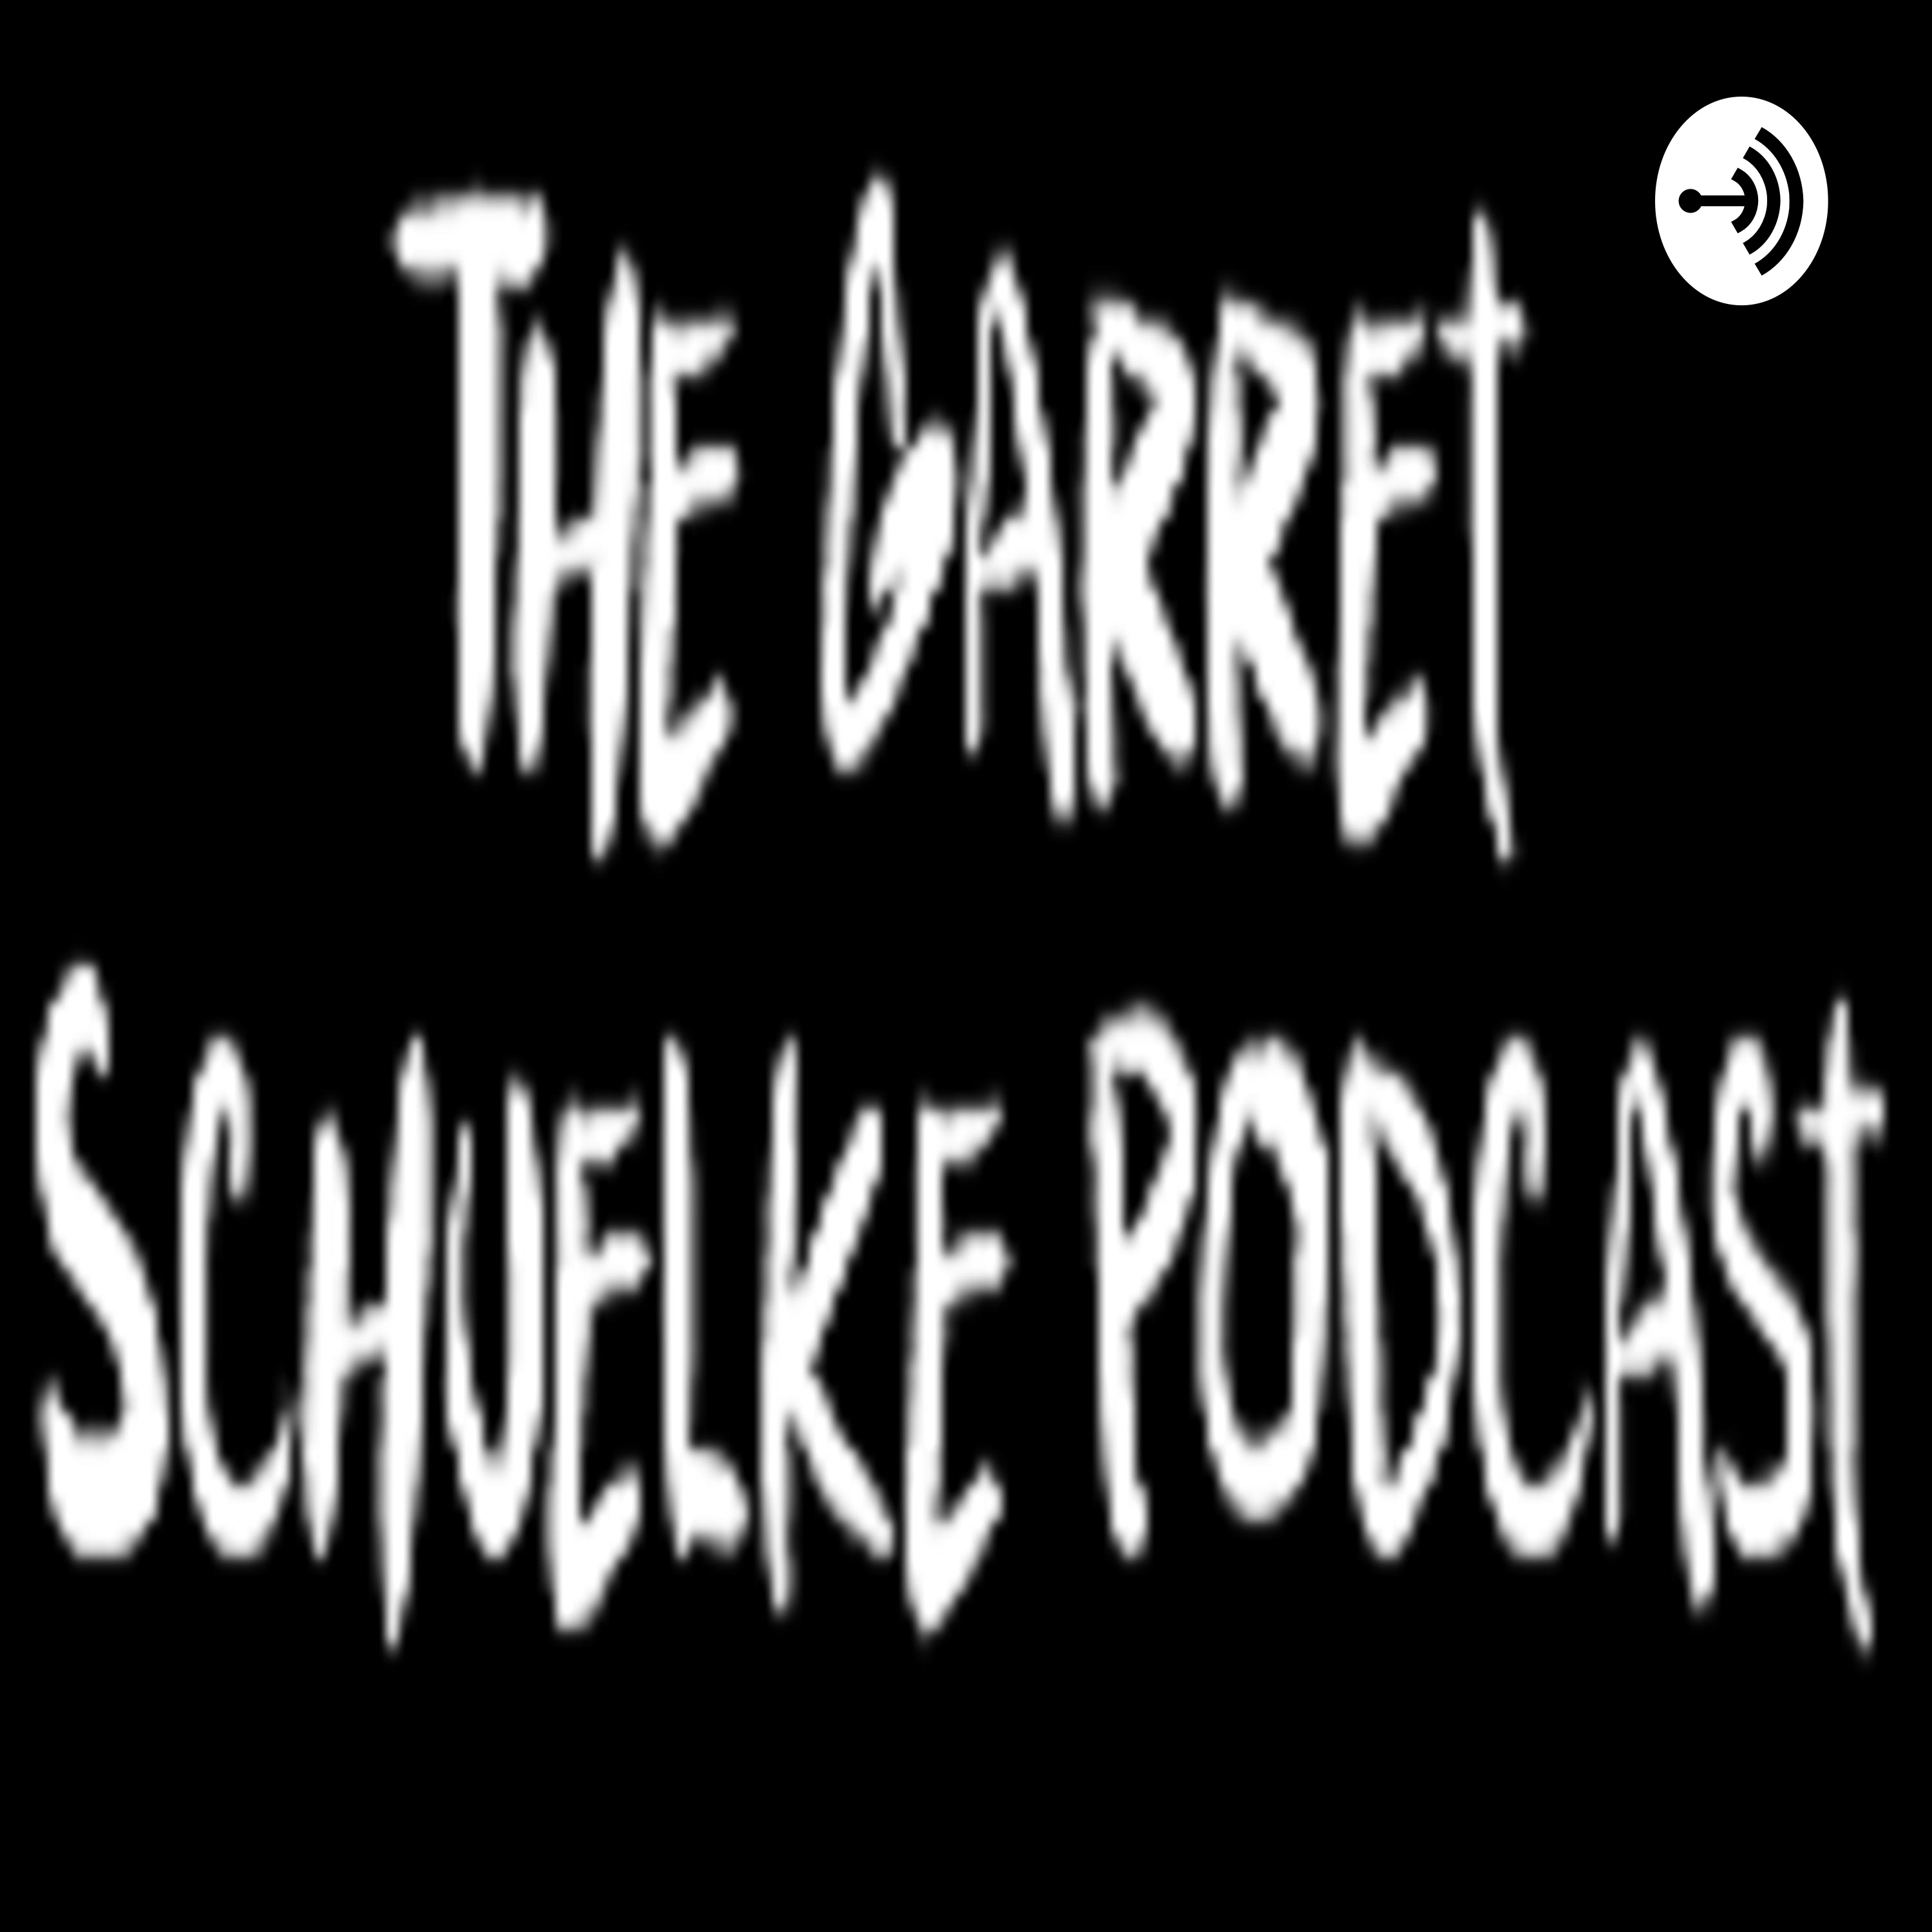 The Garret Schuelke Podcast Episode 12: Release Me God with John Withee and Zach Elmblad